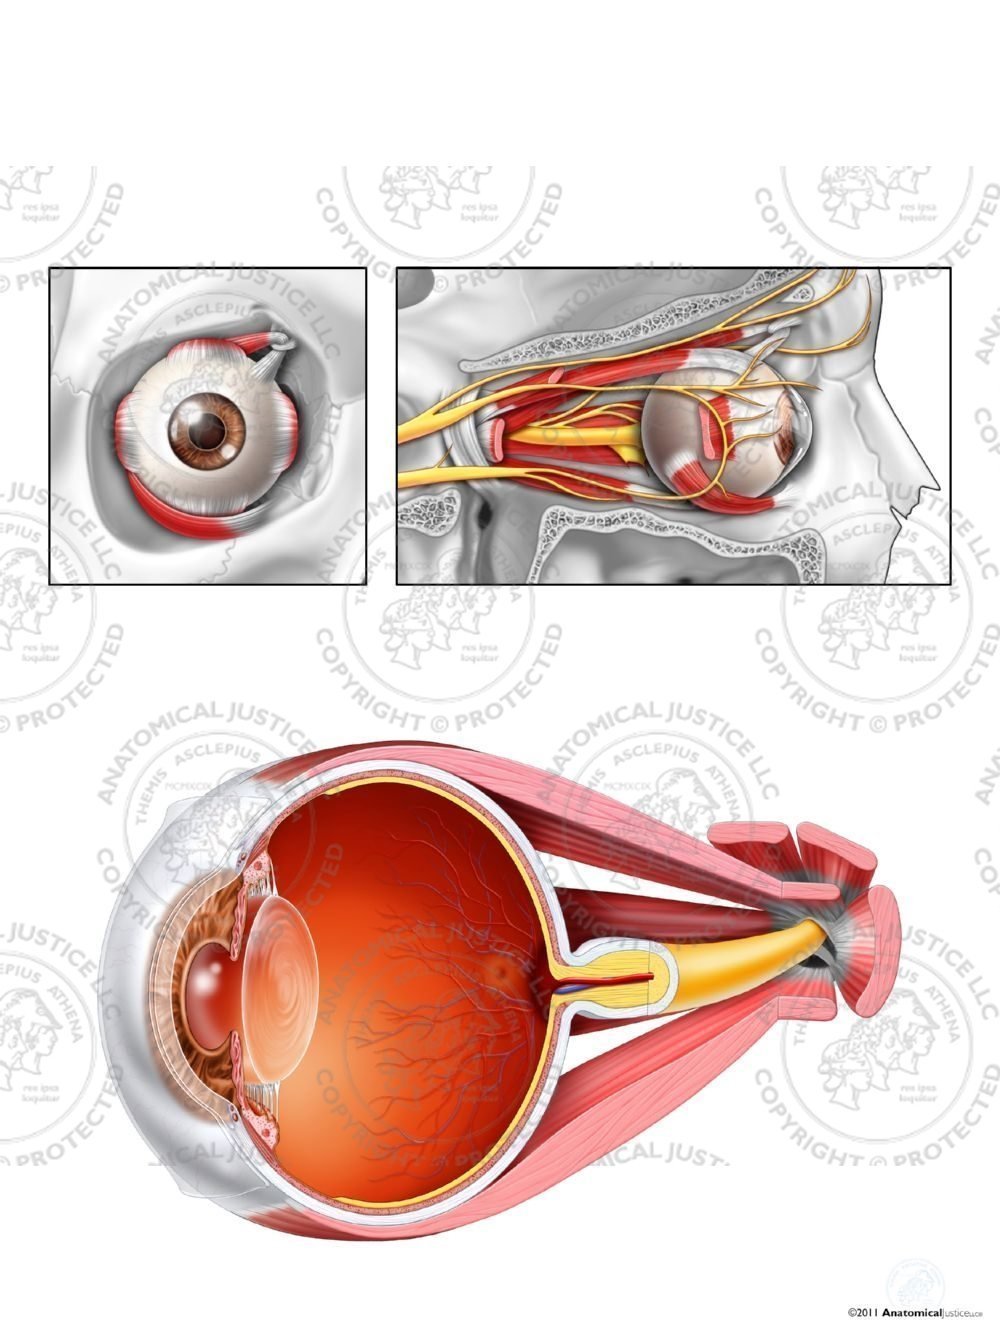 Anterior, Lateral, and Sagittal Anatomy of the Right Eye – No Text